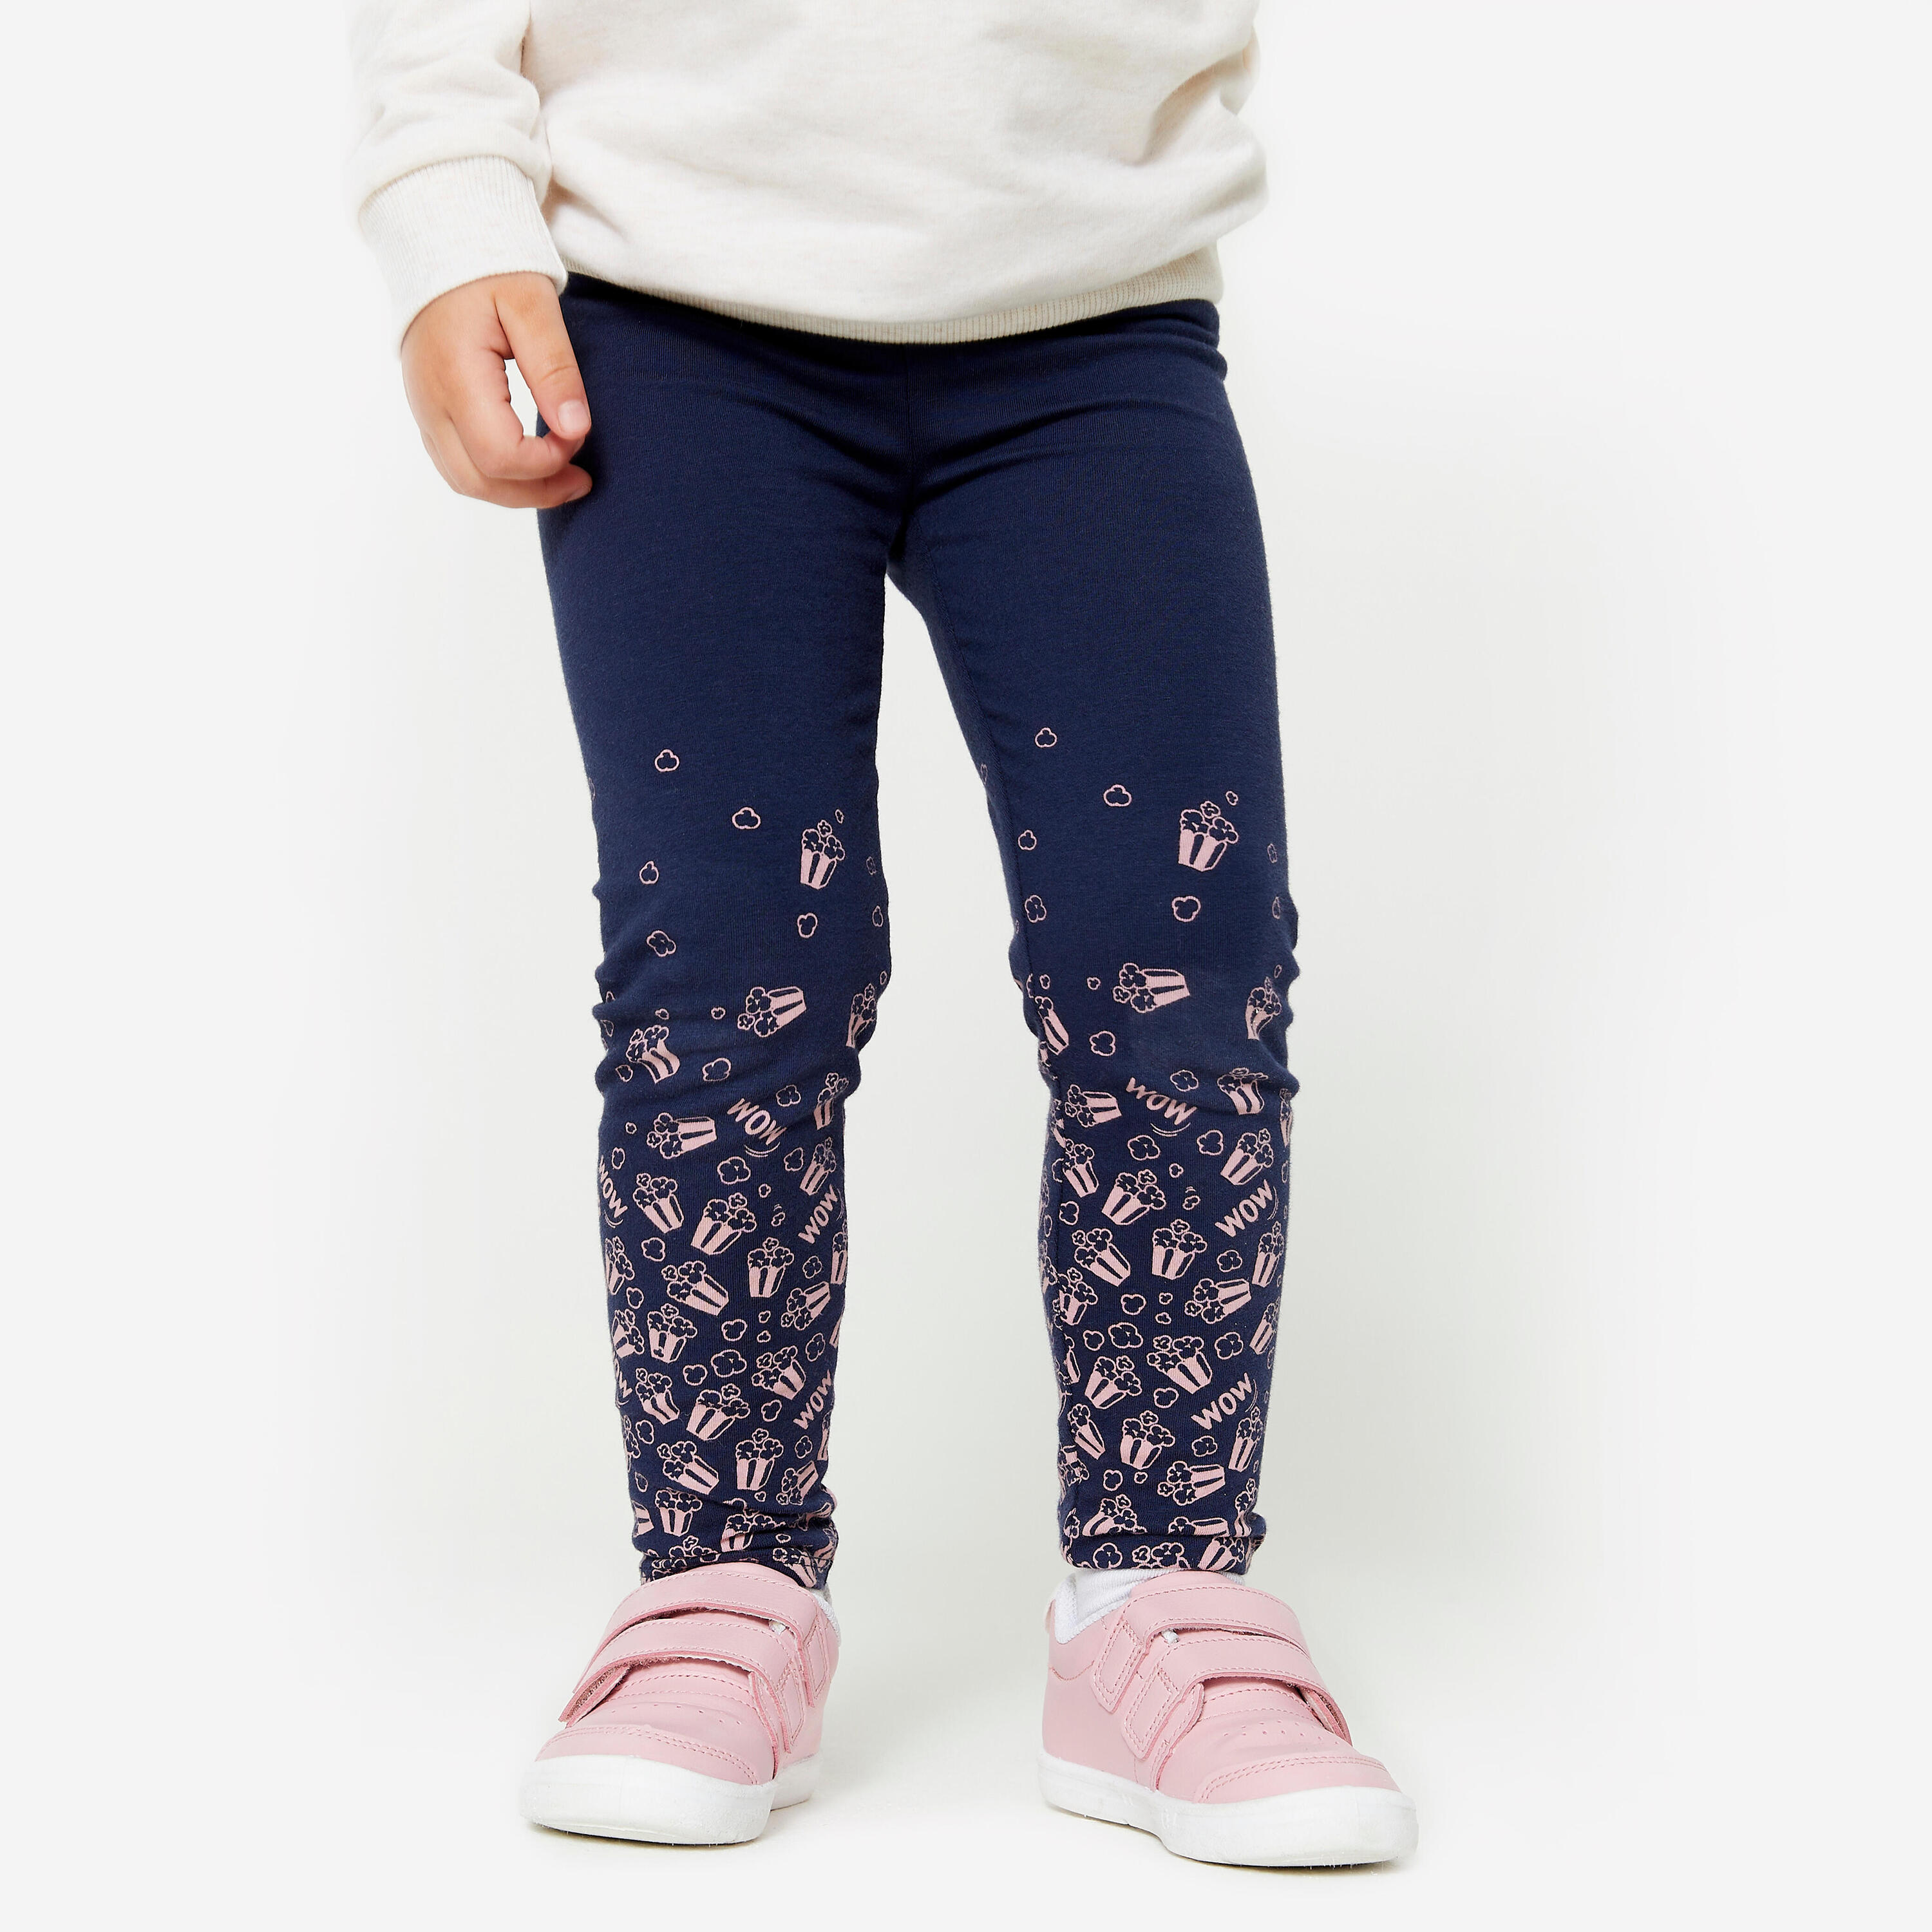 Baby Basic Cotton Leggings - Blue/Pink with Patterns 1/4